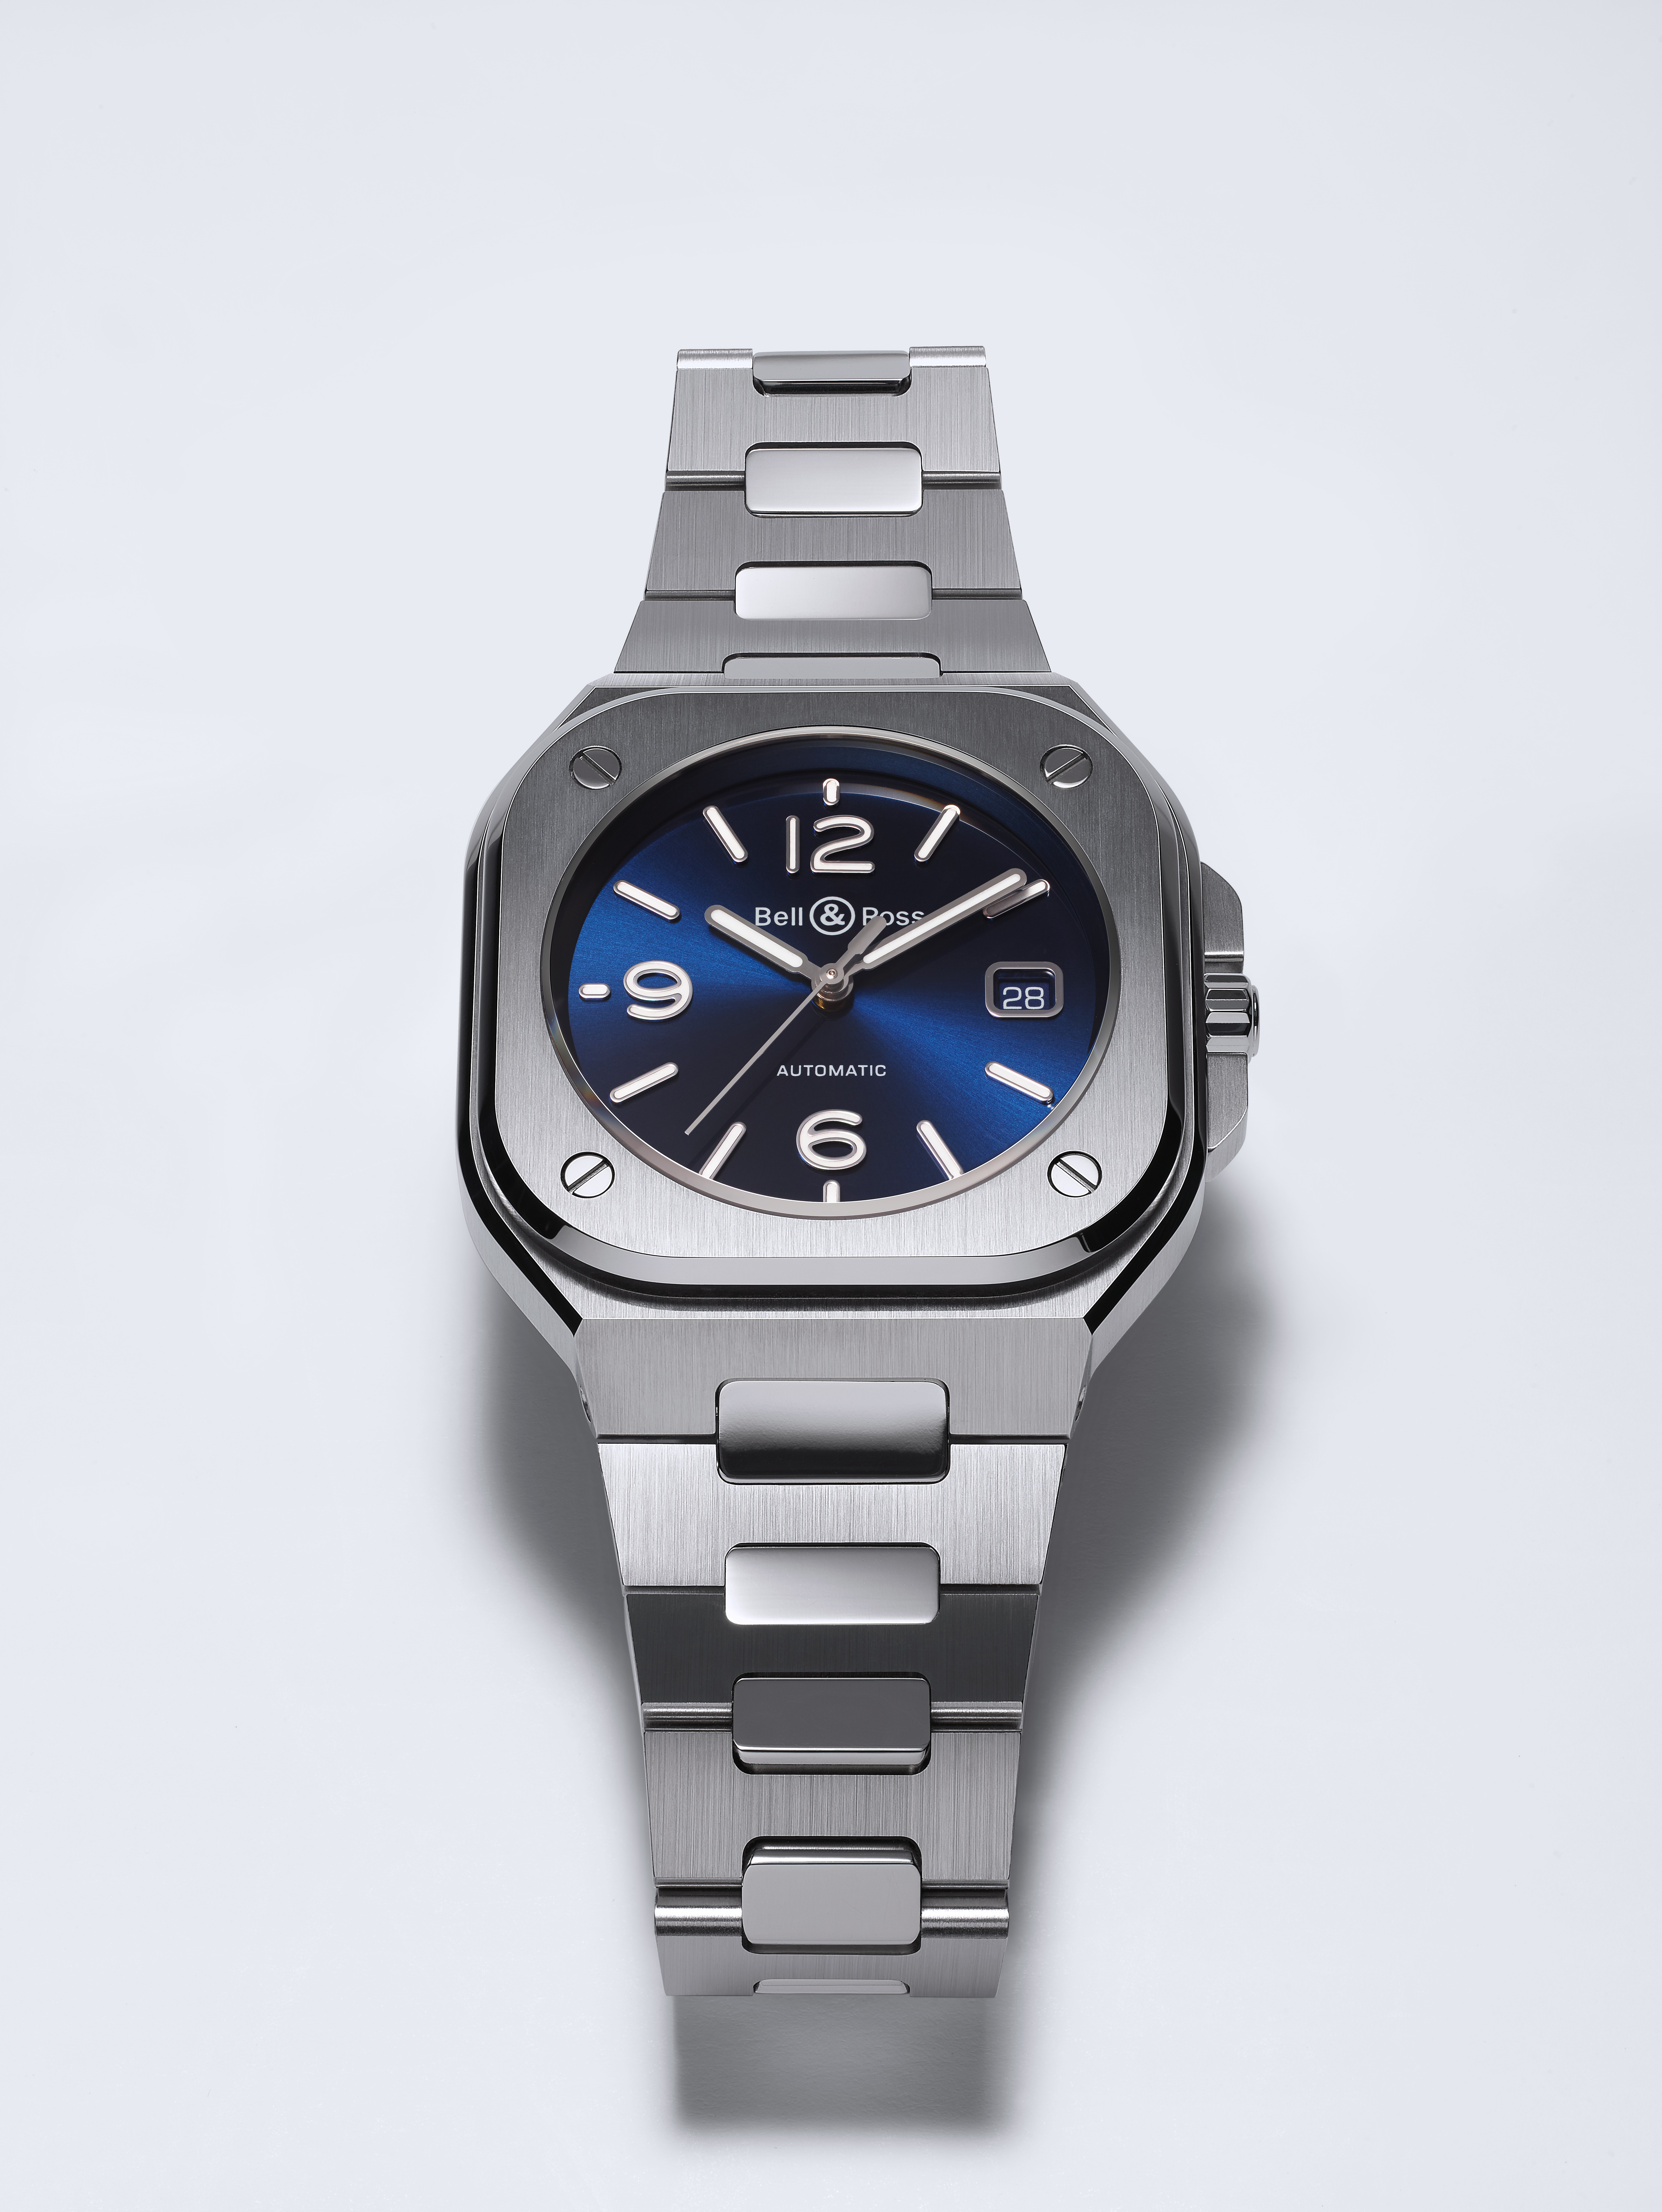 The Bell & Ross BR05, the lead watch from the brand’s new collection.